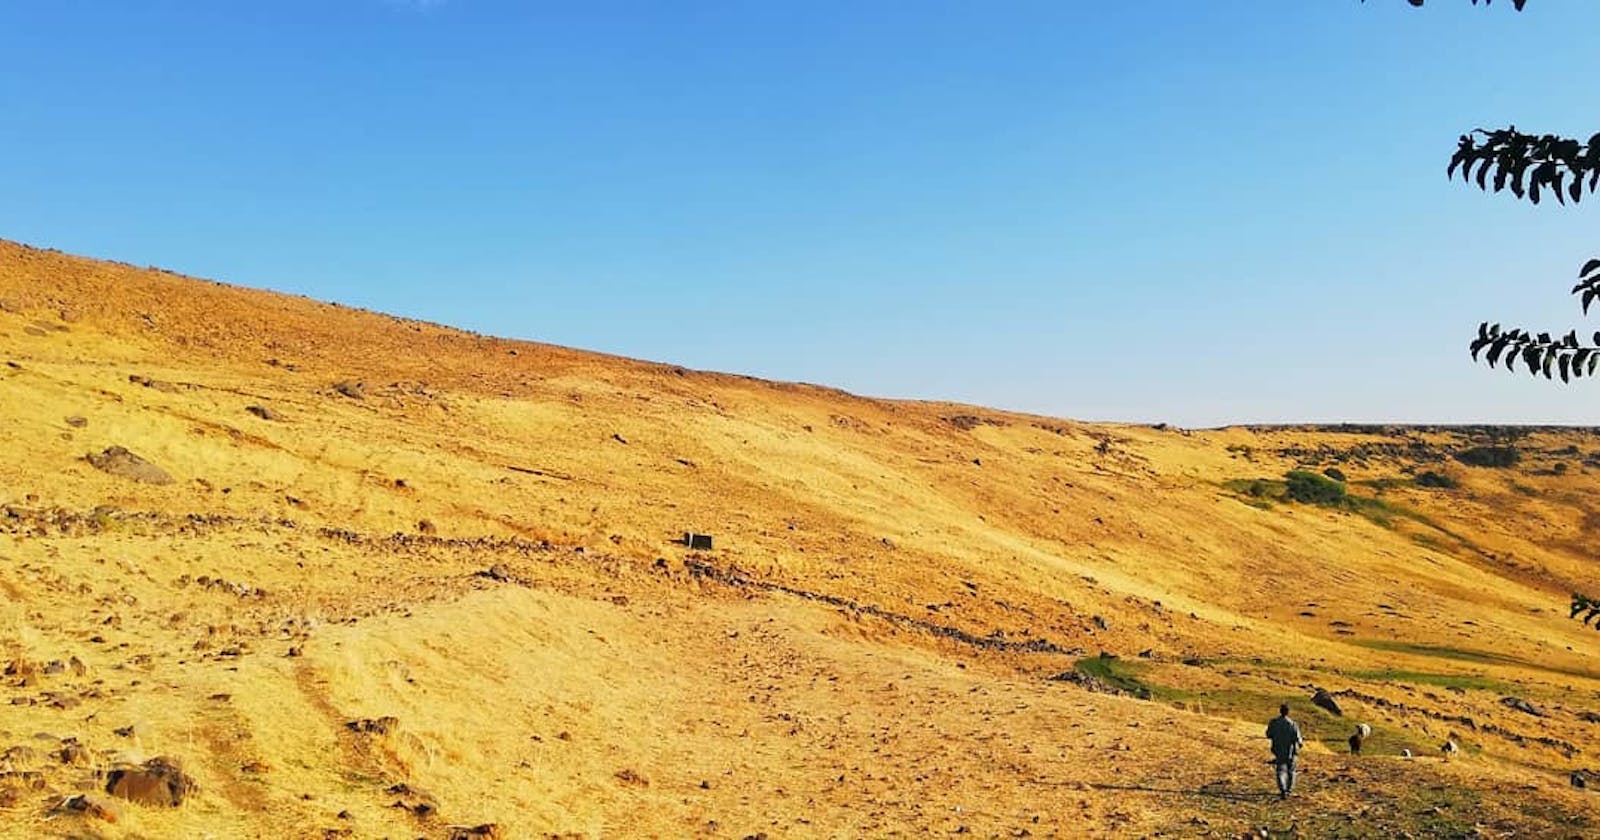 Why Is It So Hot in Cizre and What Are We Doing About It?